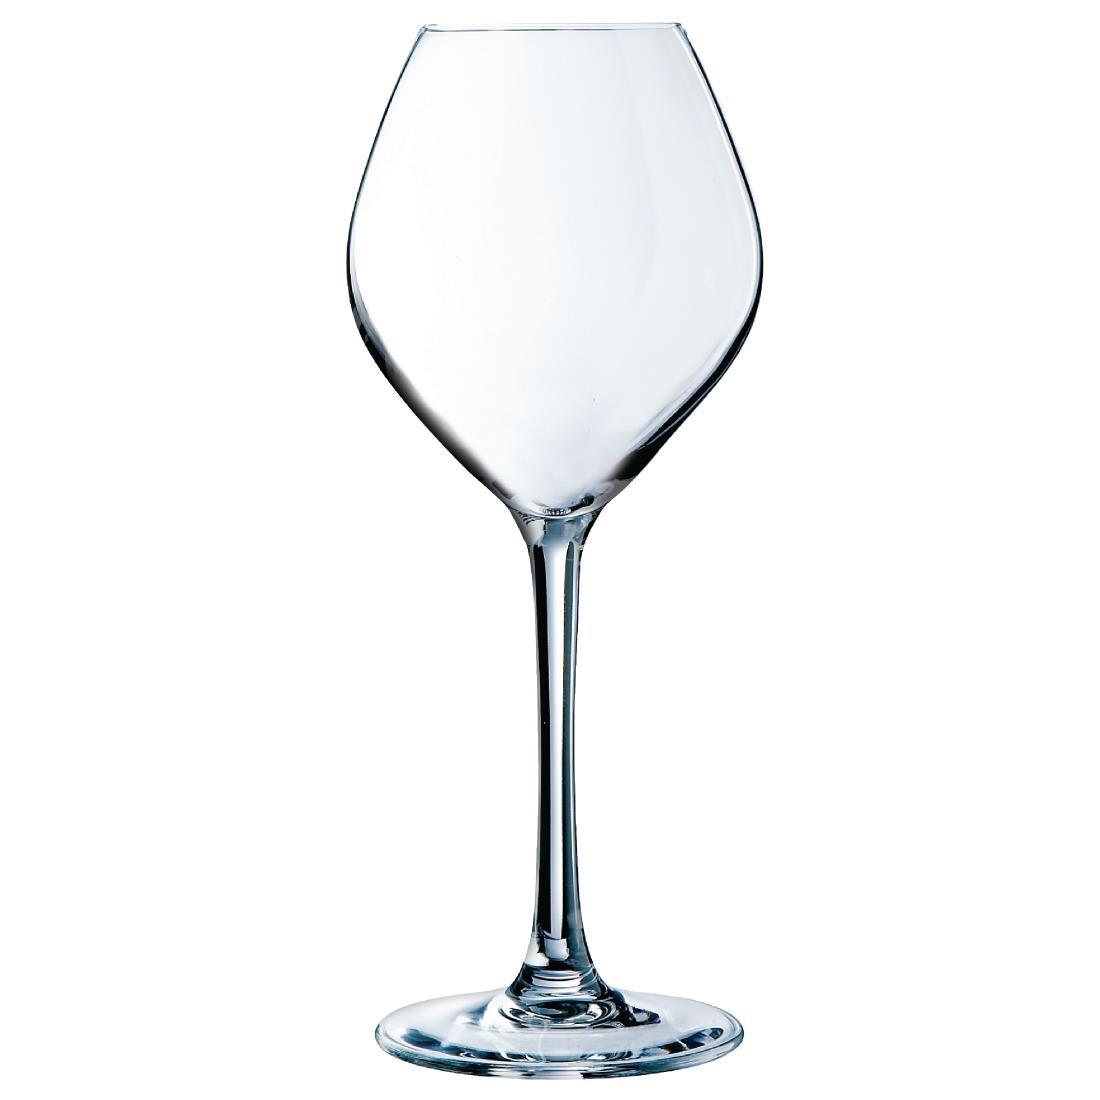 Arcoroc Grand Cepages White Wine Glasses 470ml (Pack of 12) - DH853  - 1